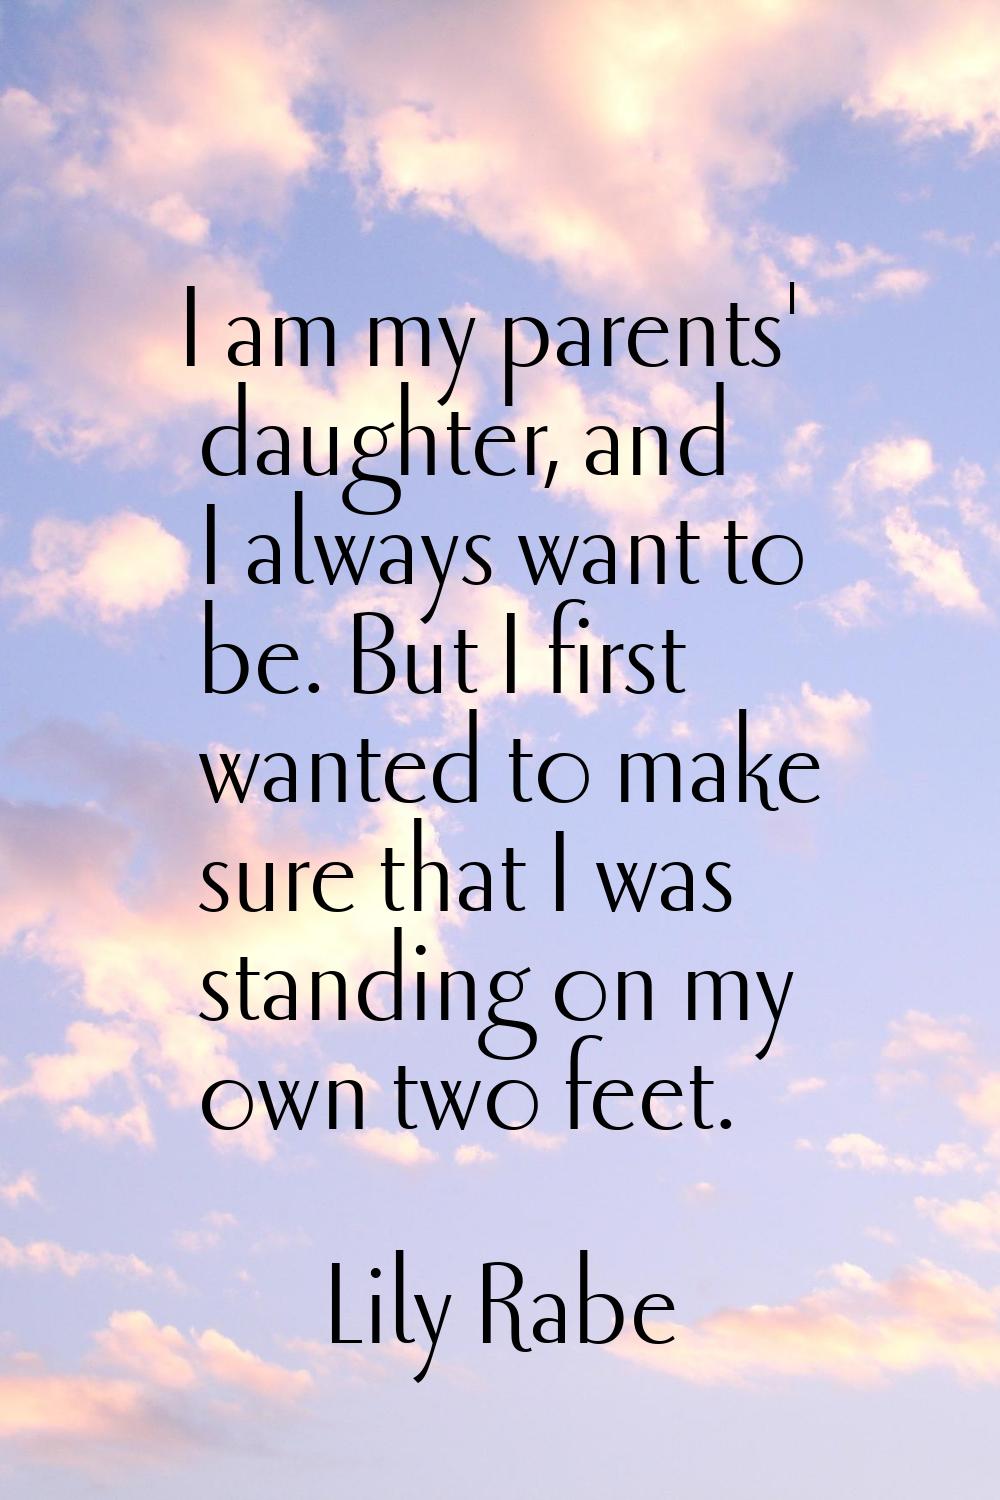 I am my parents' daughter, and I always want to be. But I first wanted to make sure that I was stan